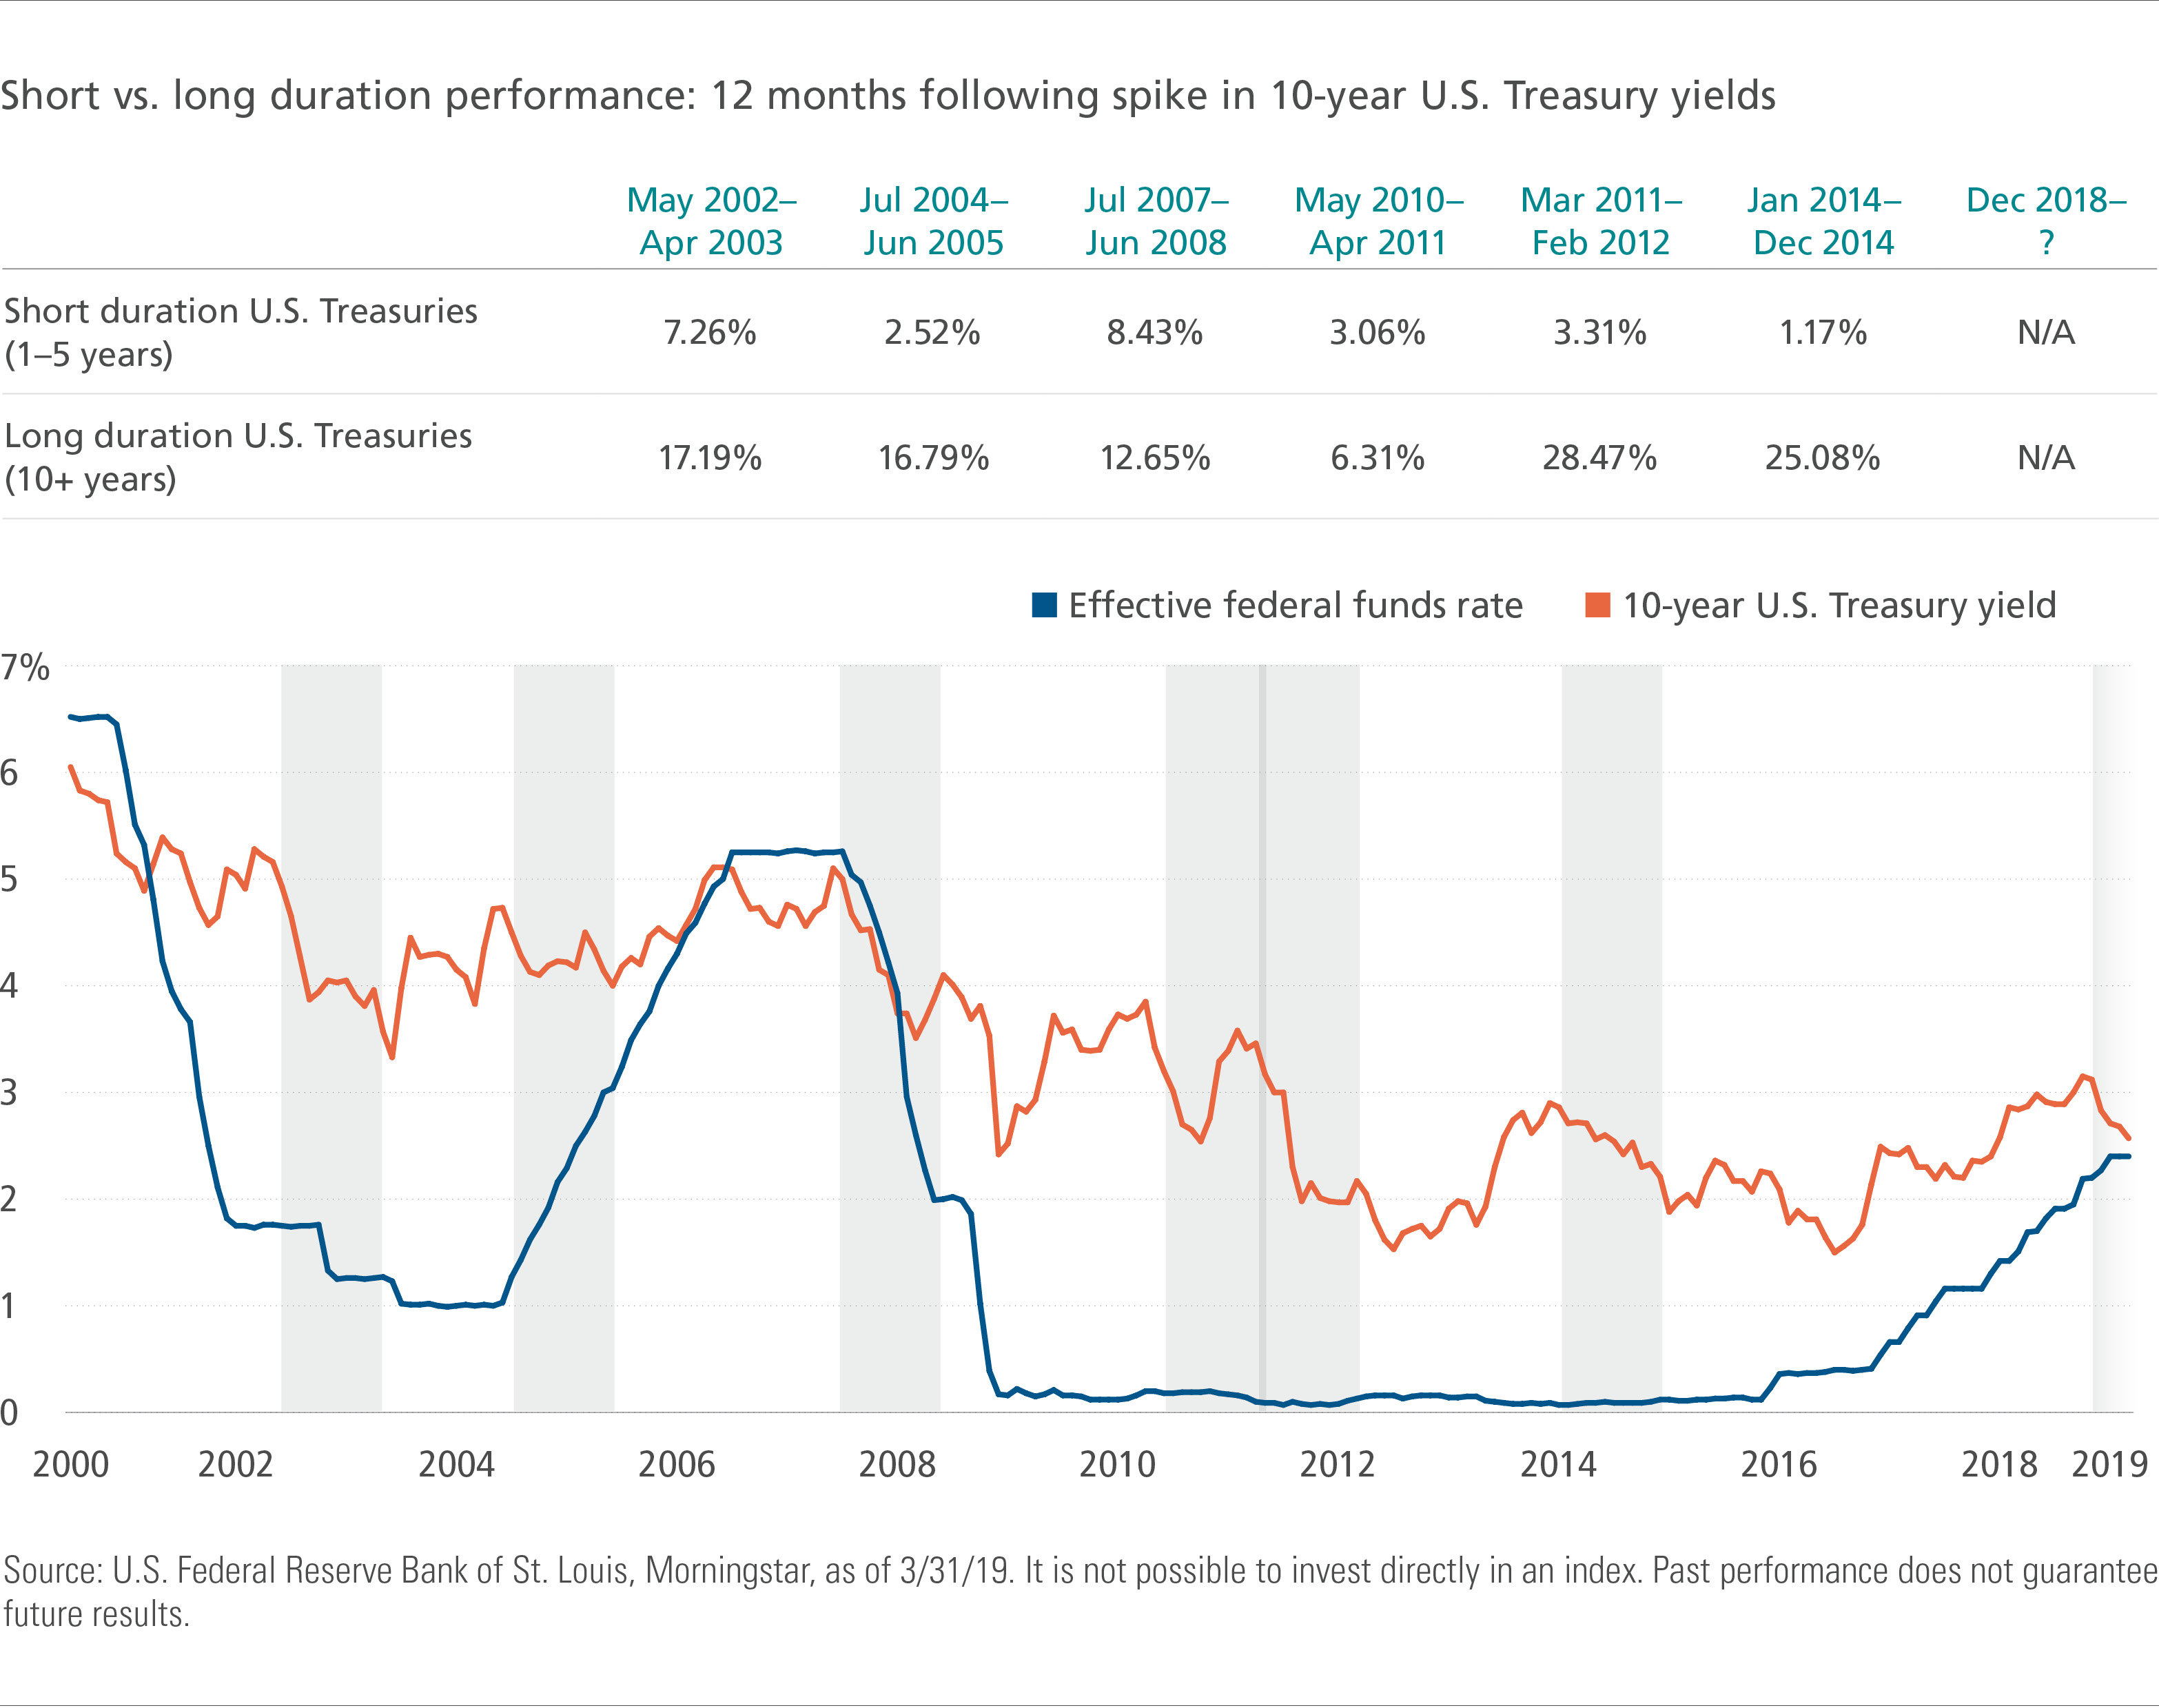 Short vs. long duration performance: 12 months following spike in 10-year U.S. Treasury yields